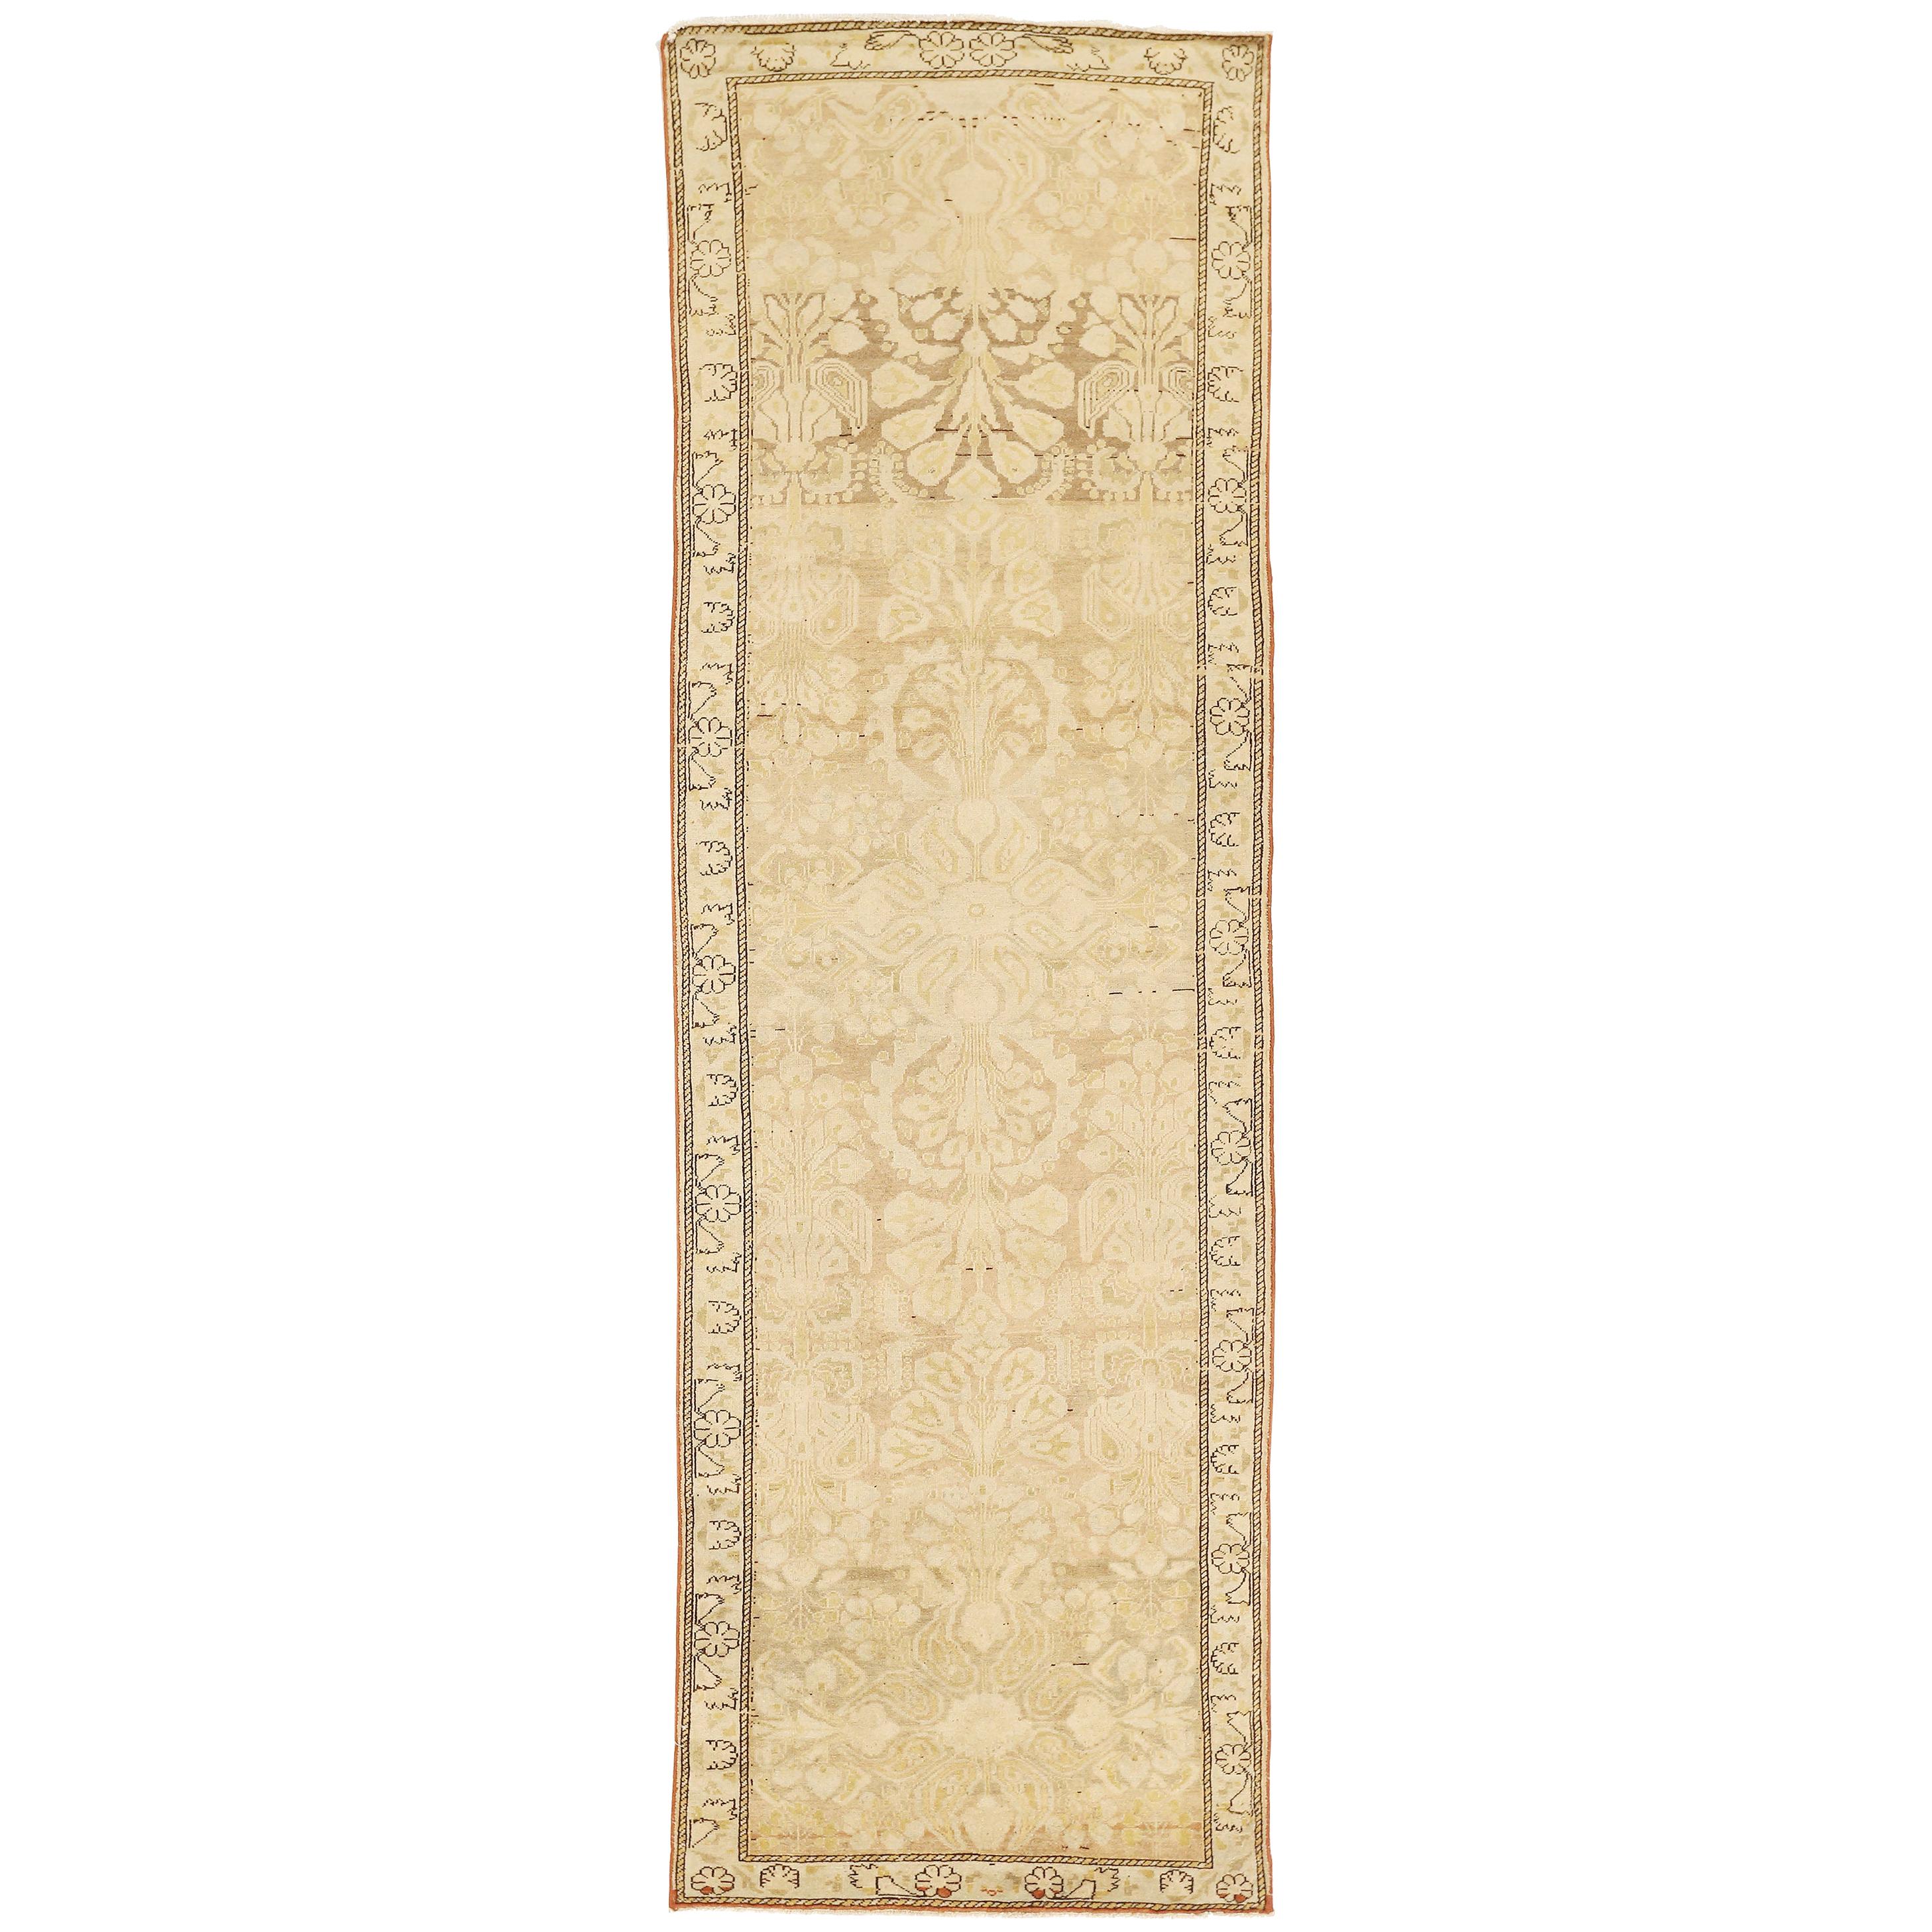 Antique Persian Bakhtiar Runner Rug with Faded Floral Details in Brown and Ivory